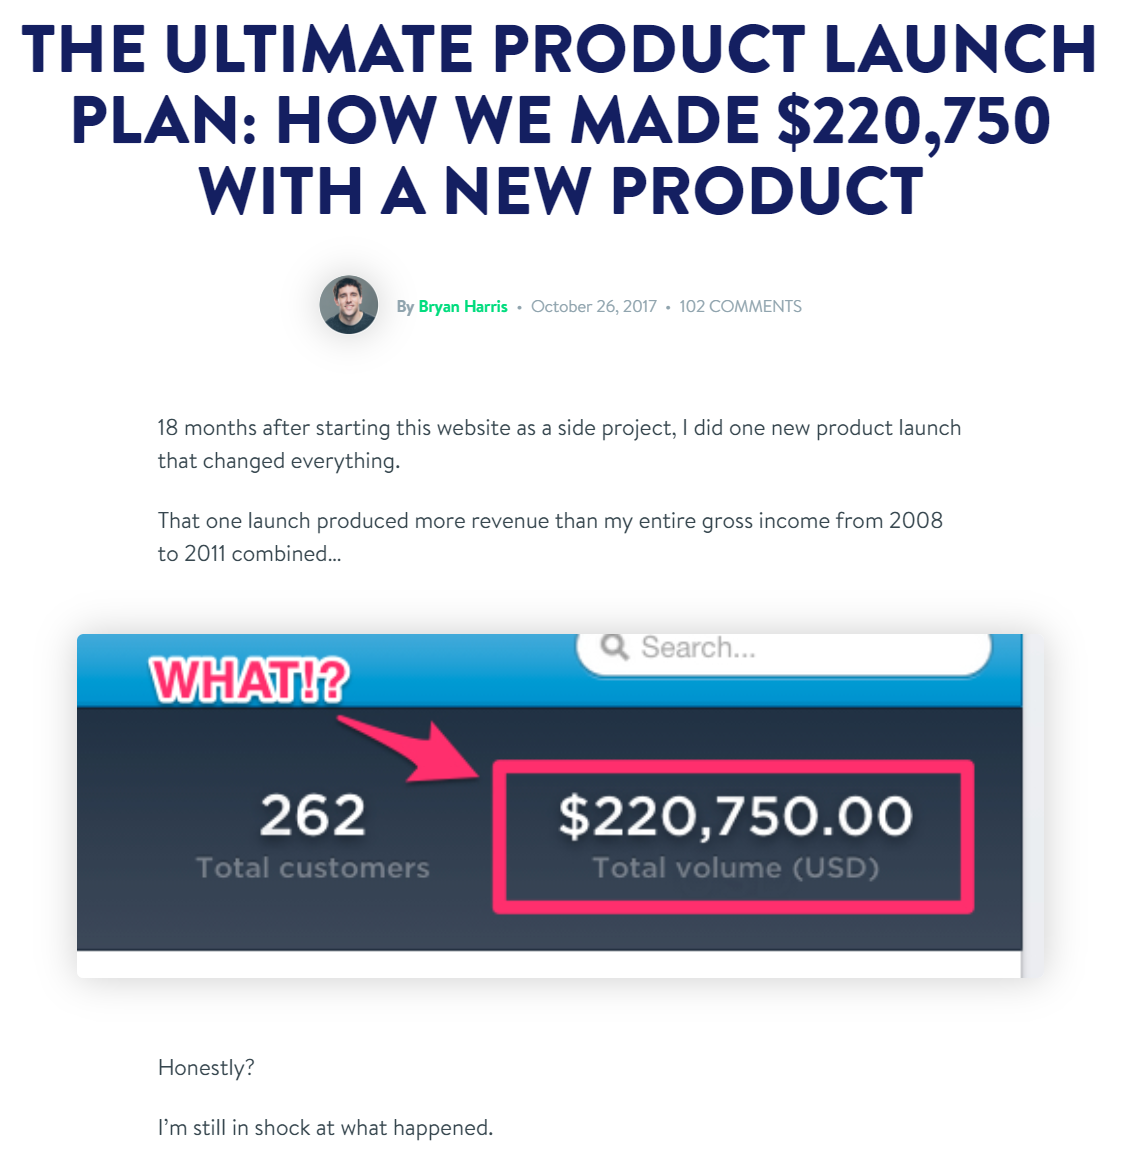 Screenshot of blog post (THE ULTIMATE PRODUCT LAUNCH PLAN: HOW WE MADE $220,750 WITH A NEW PRODUCT) from Growth Tools